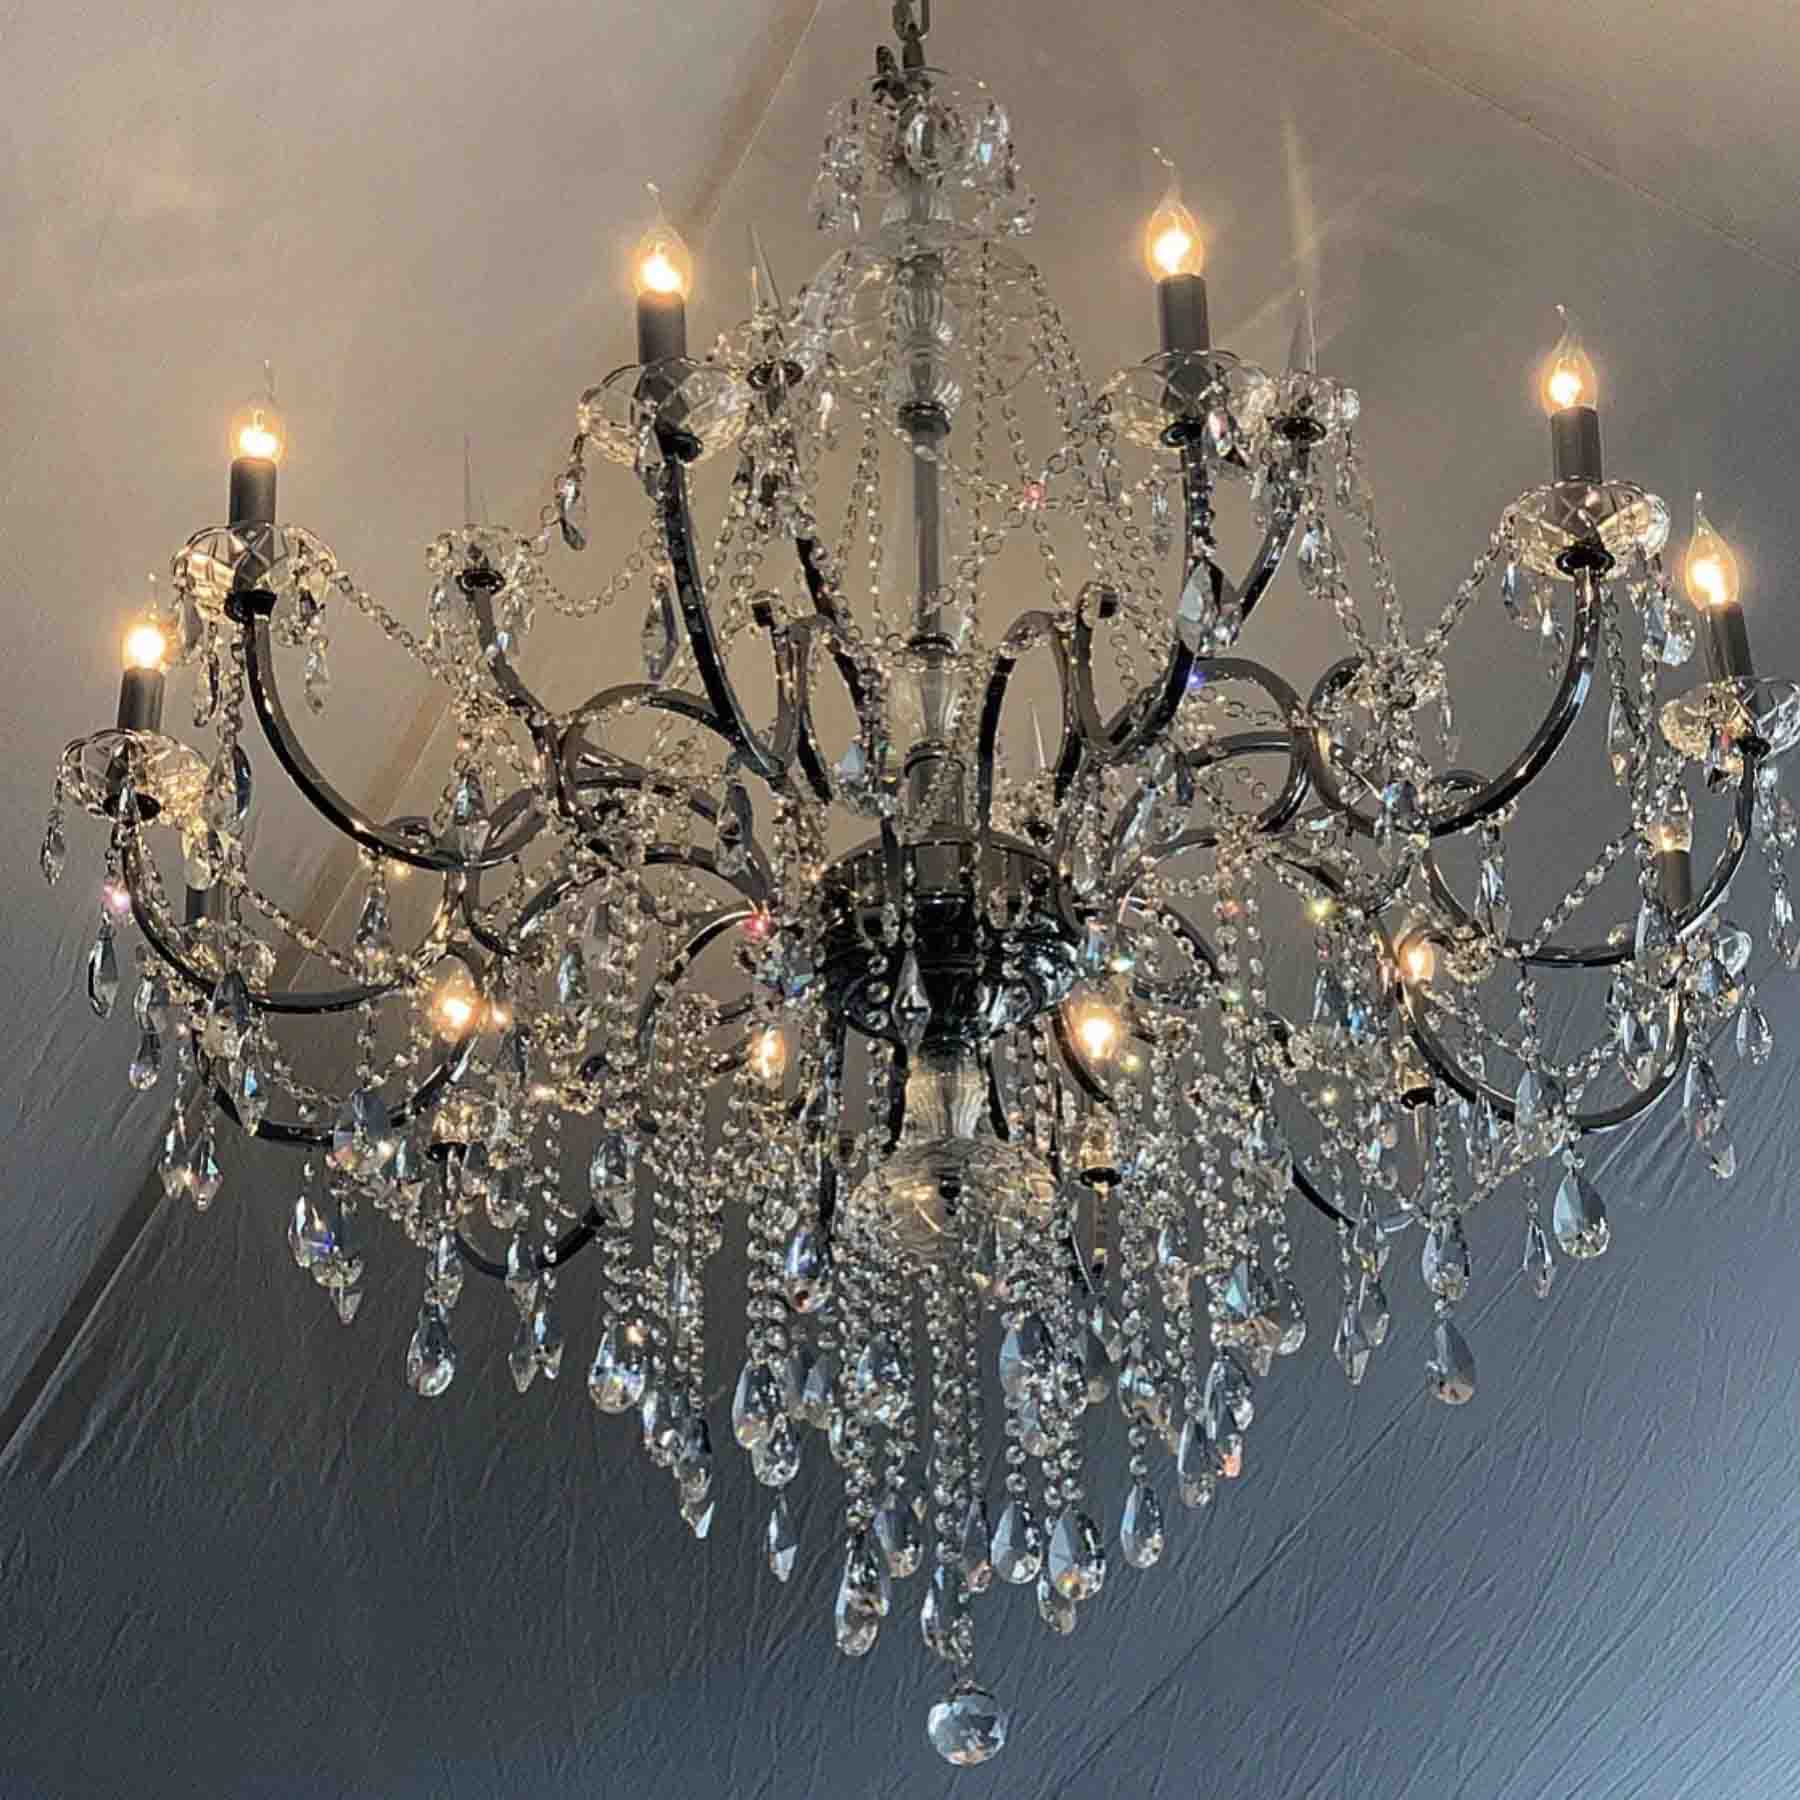 this chandelier design stands the test of time capturing widespread popularity